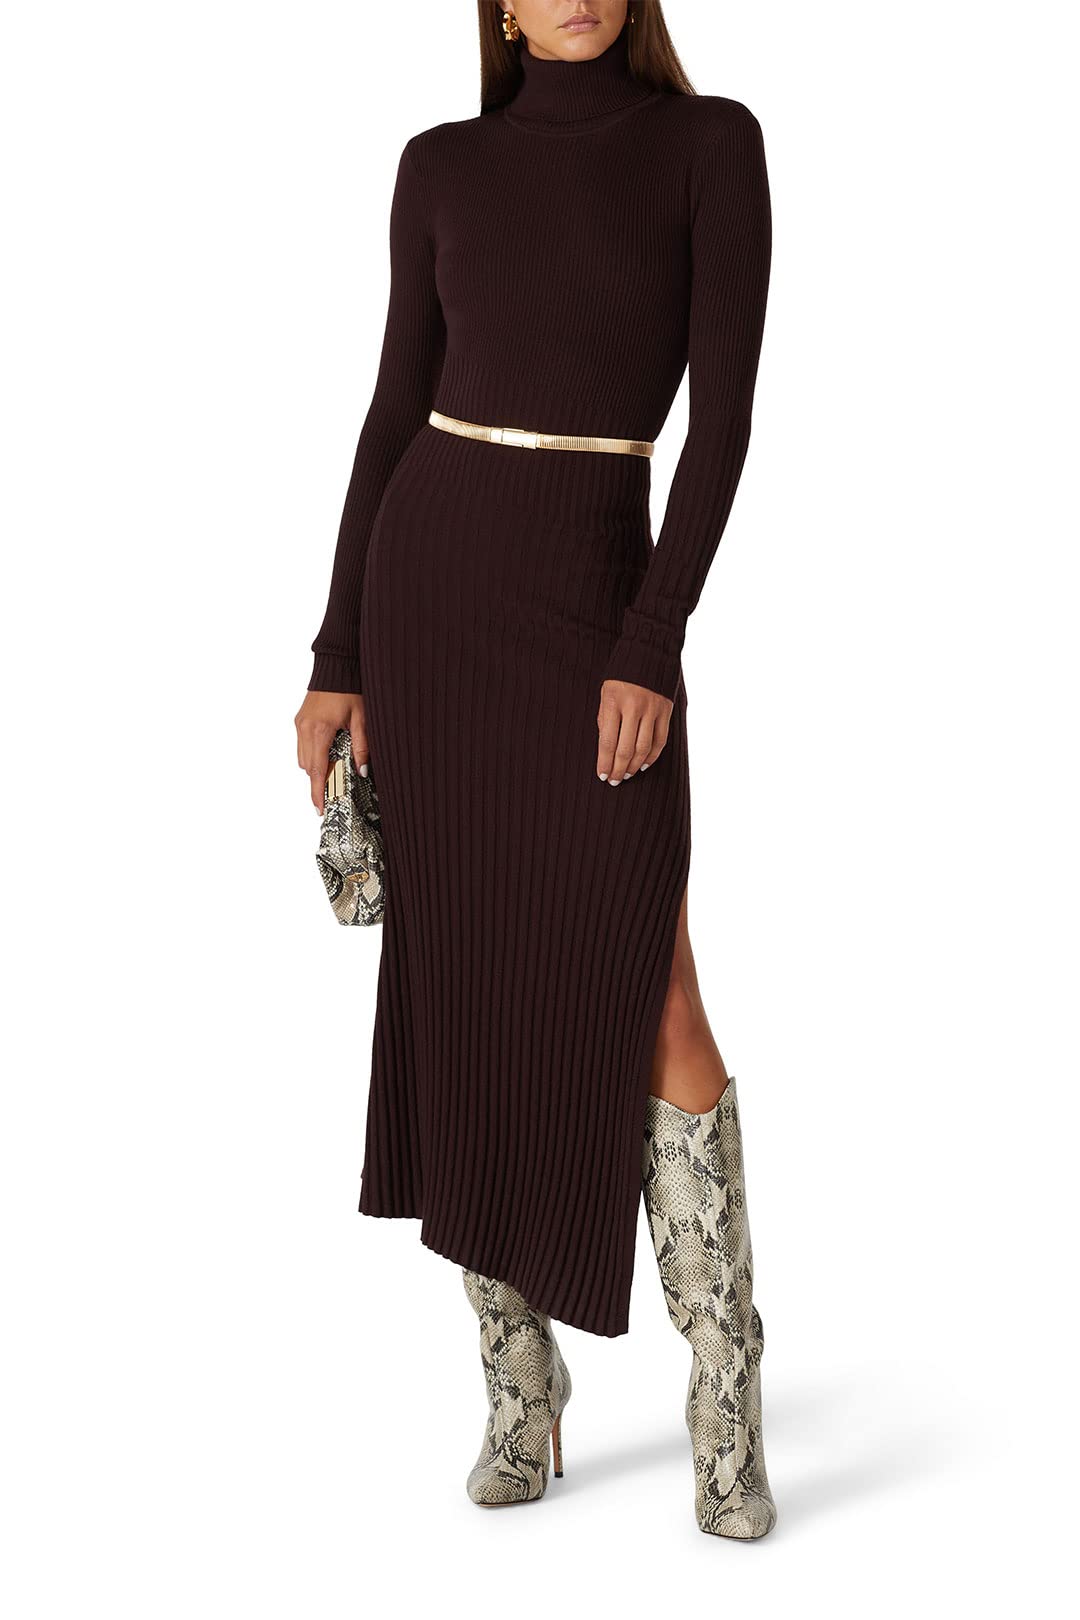 A.L.C. Rent the Runway Pre-Loved Emmy Turtleneck Dress, Brown, X-Small